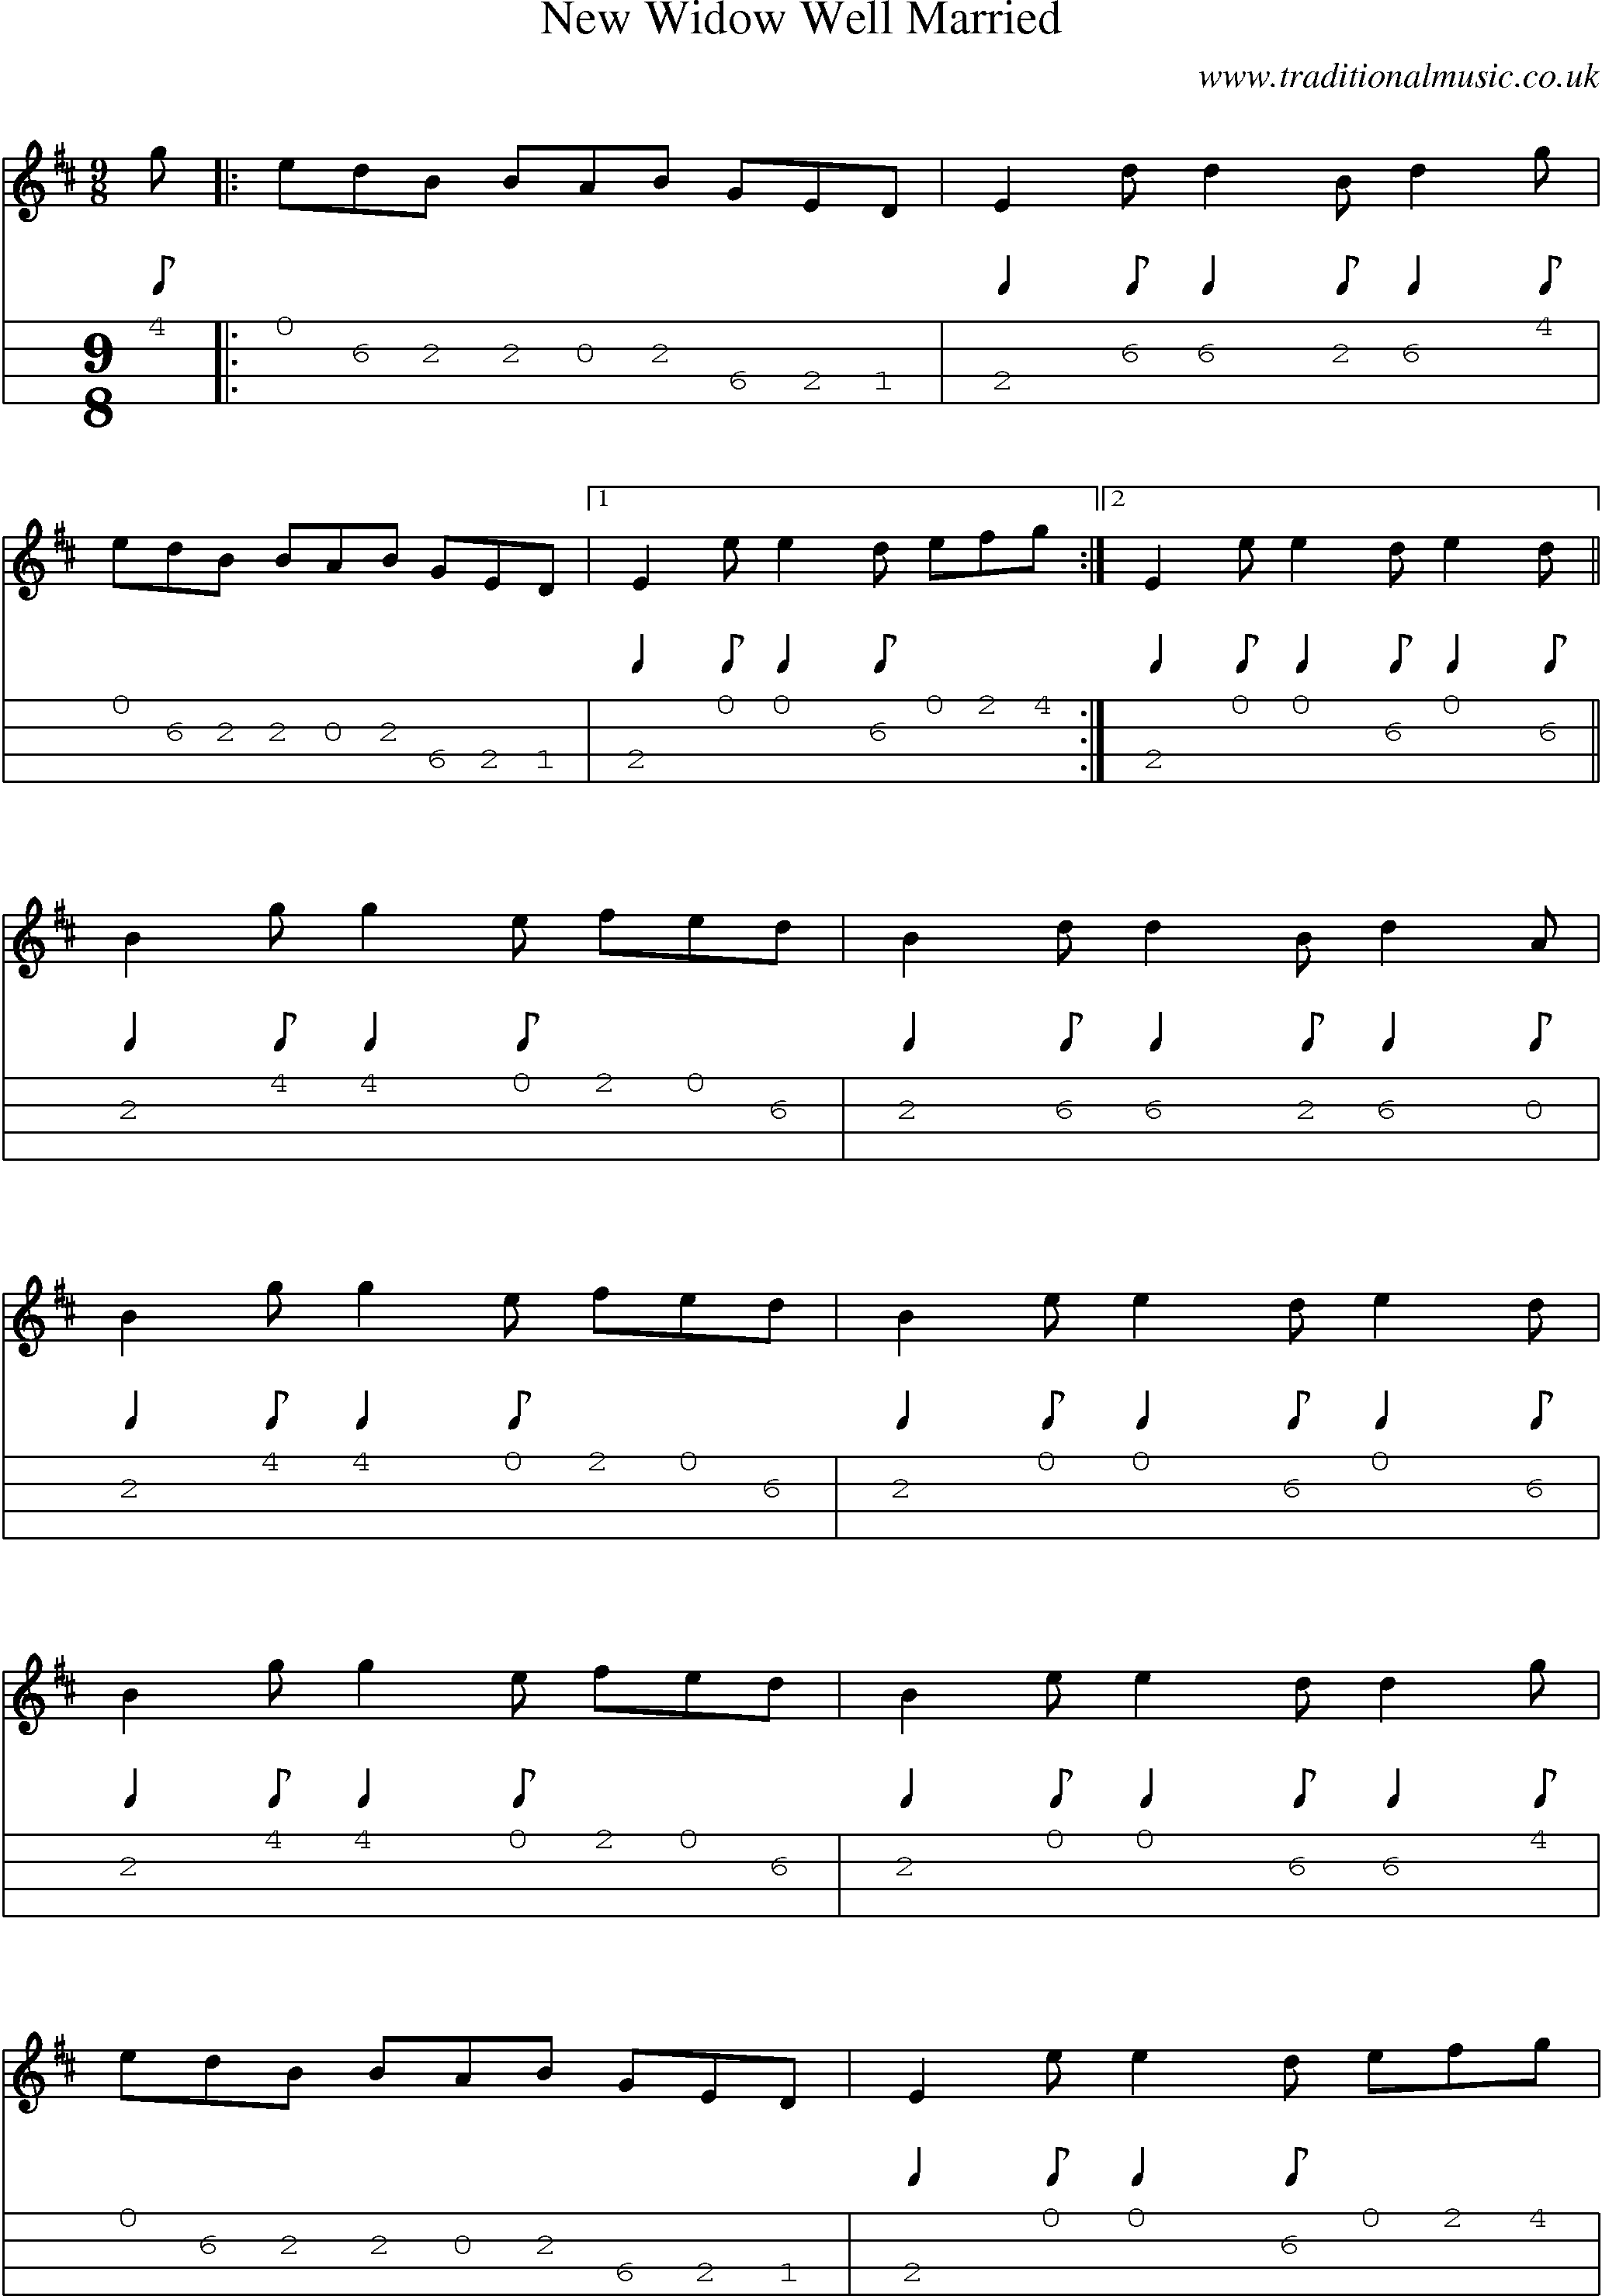 Music Score and Mandolin Tabs for New Widow Well Married